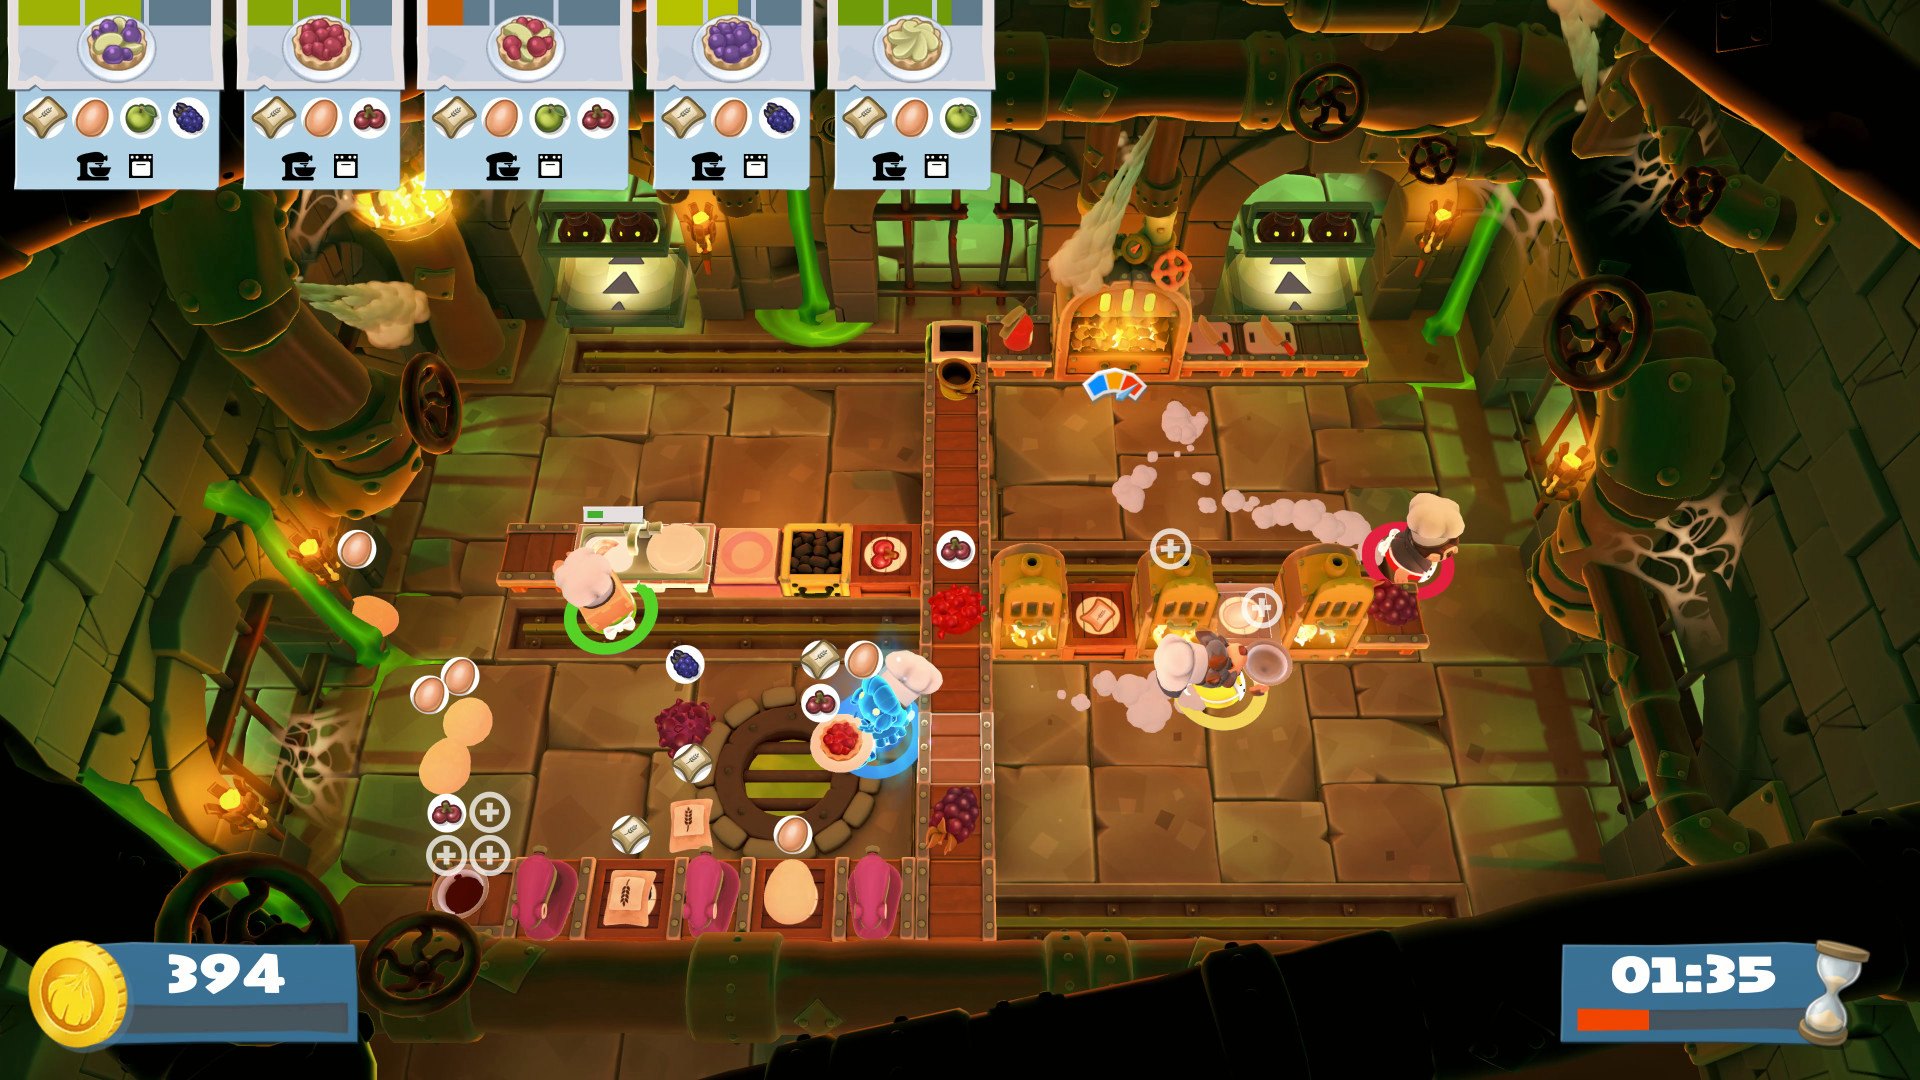 Overcooked! 2 - Night Of The Hangry Horde DLC Steam CD Key